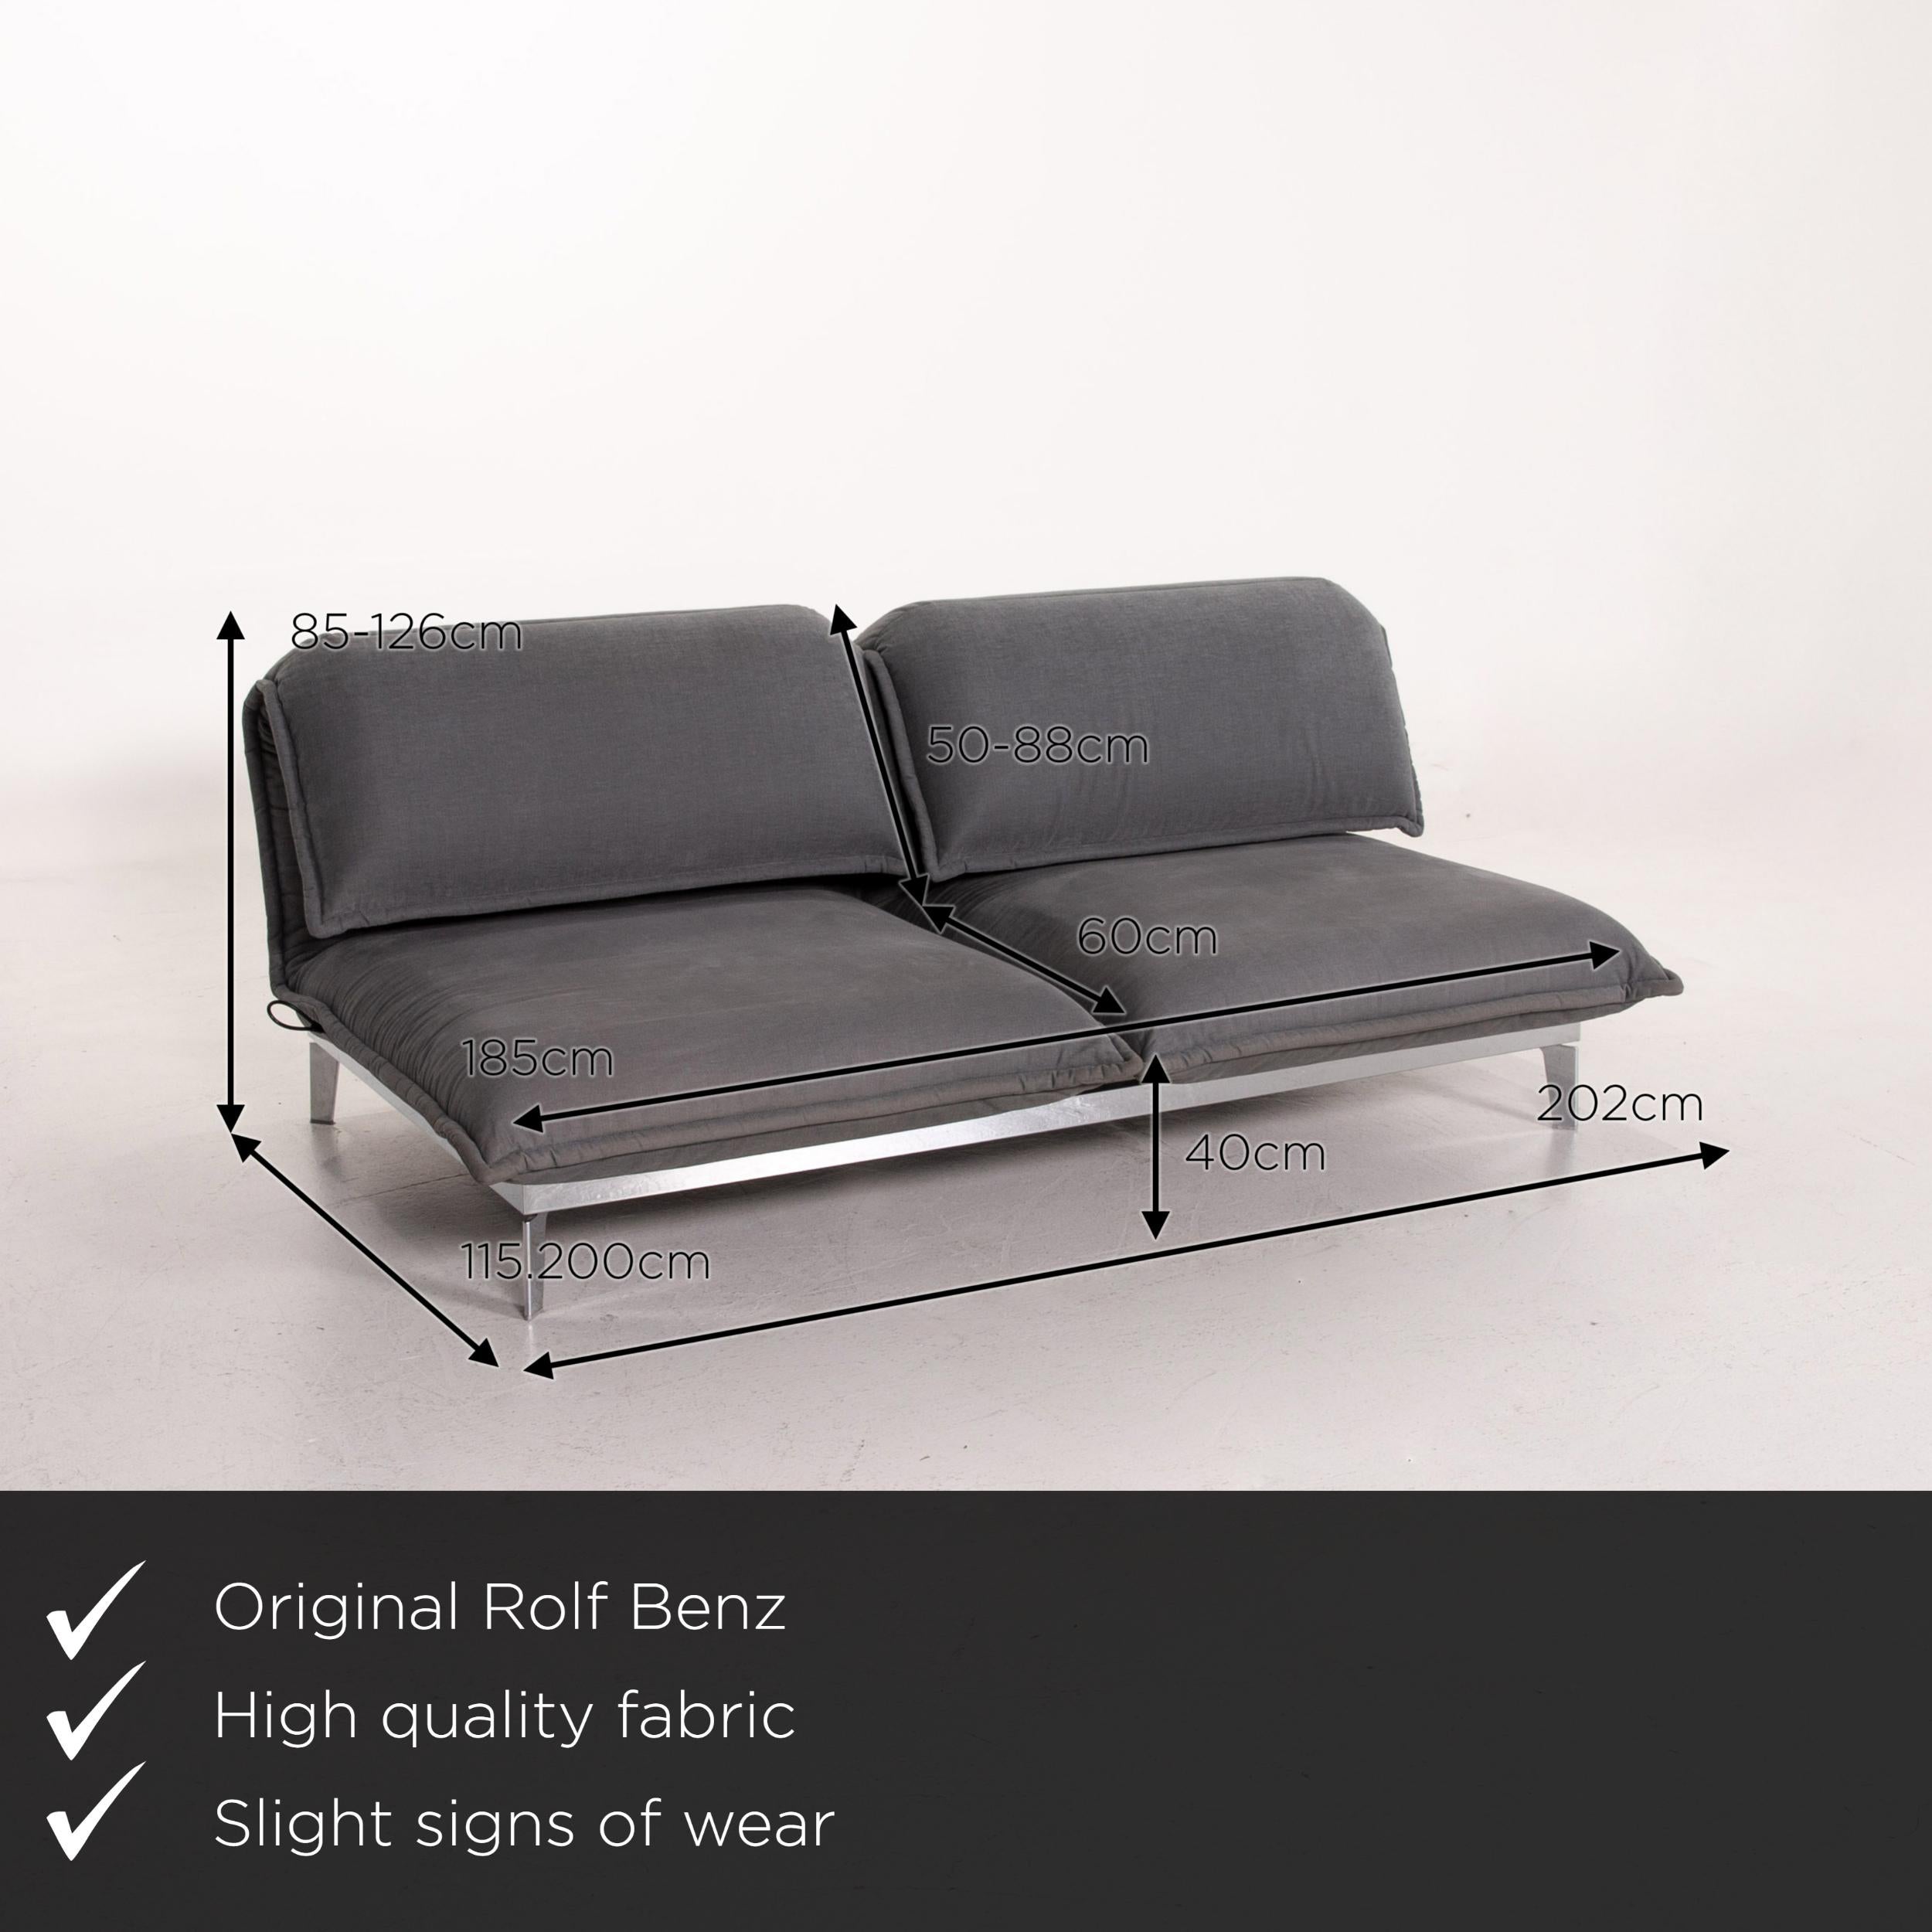 We present to you a Rolf Benz Nova fabric sofa bed gray gray blue two-seater function sleeping.
 

 Product measurements in centimeters:
 

Depth 115
Width 202
Height 85
Seat height 40
Seat depth 60
Seat width 185
Back height 50.

 